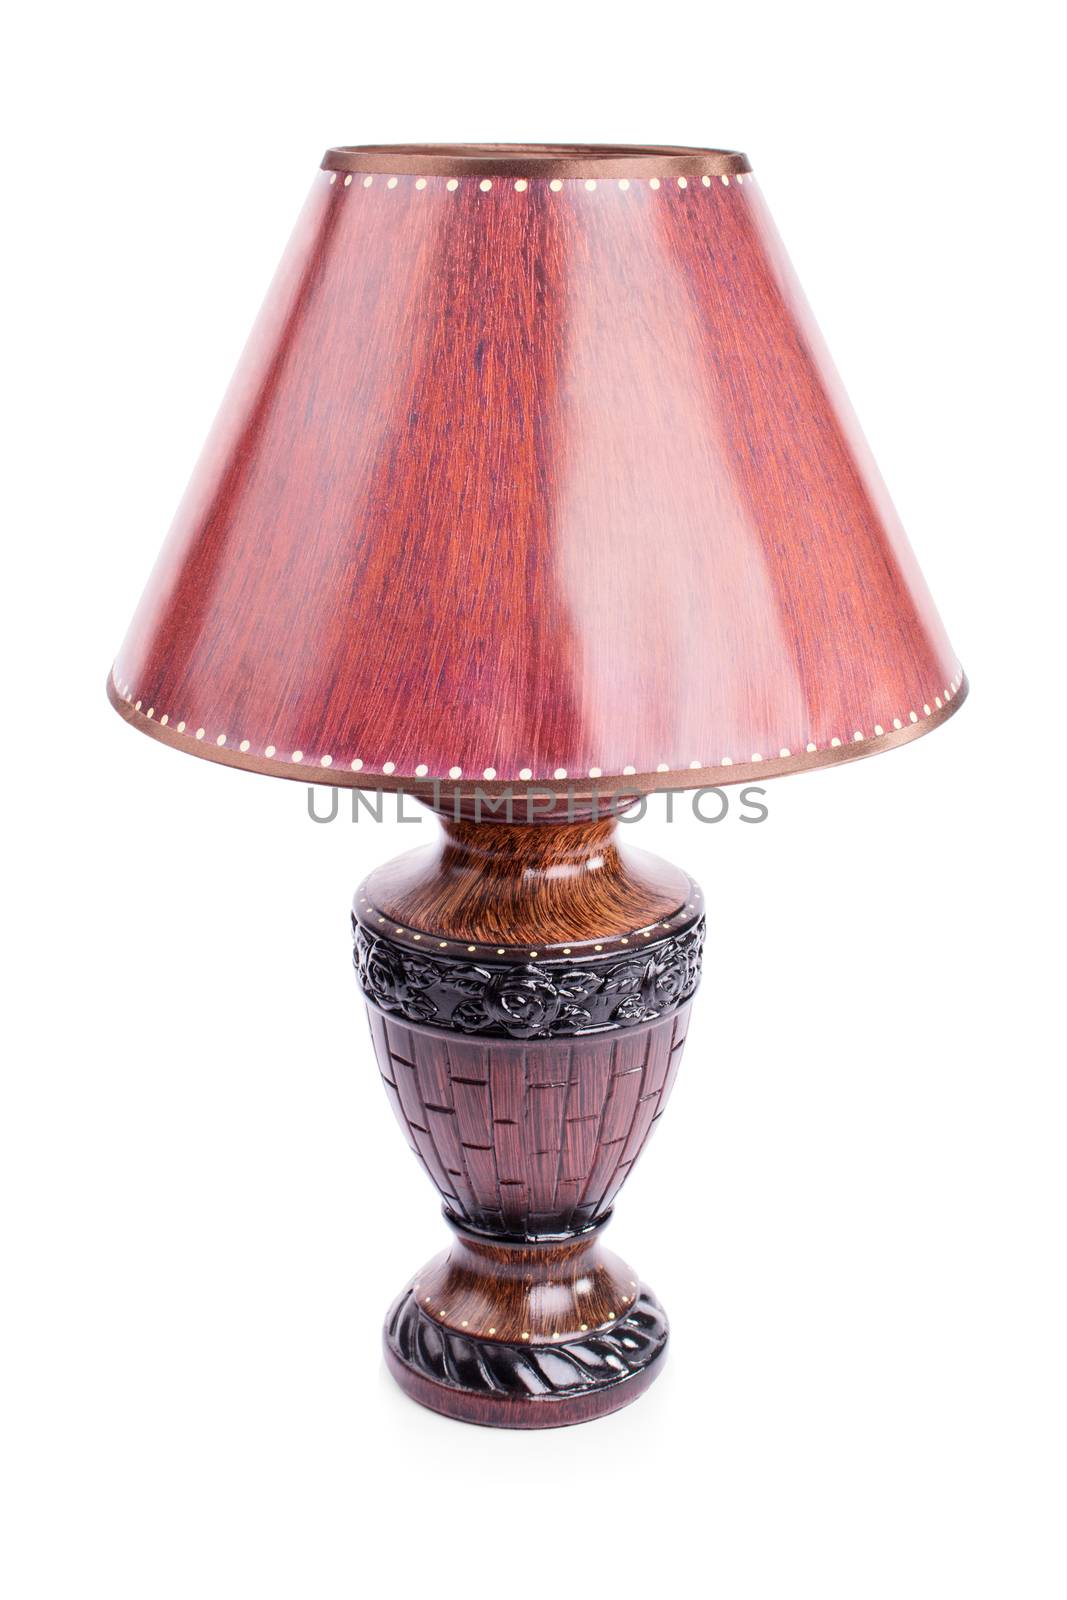 Old fashioned antique nightstand lamp, isolated on white background.